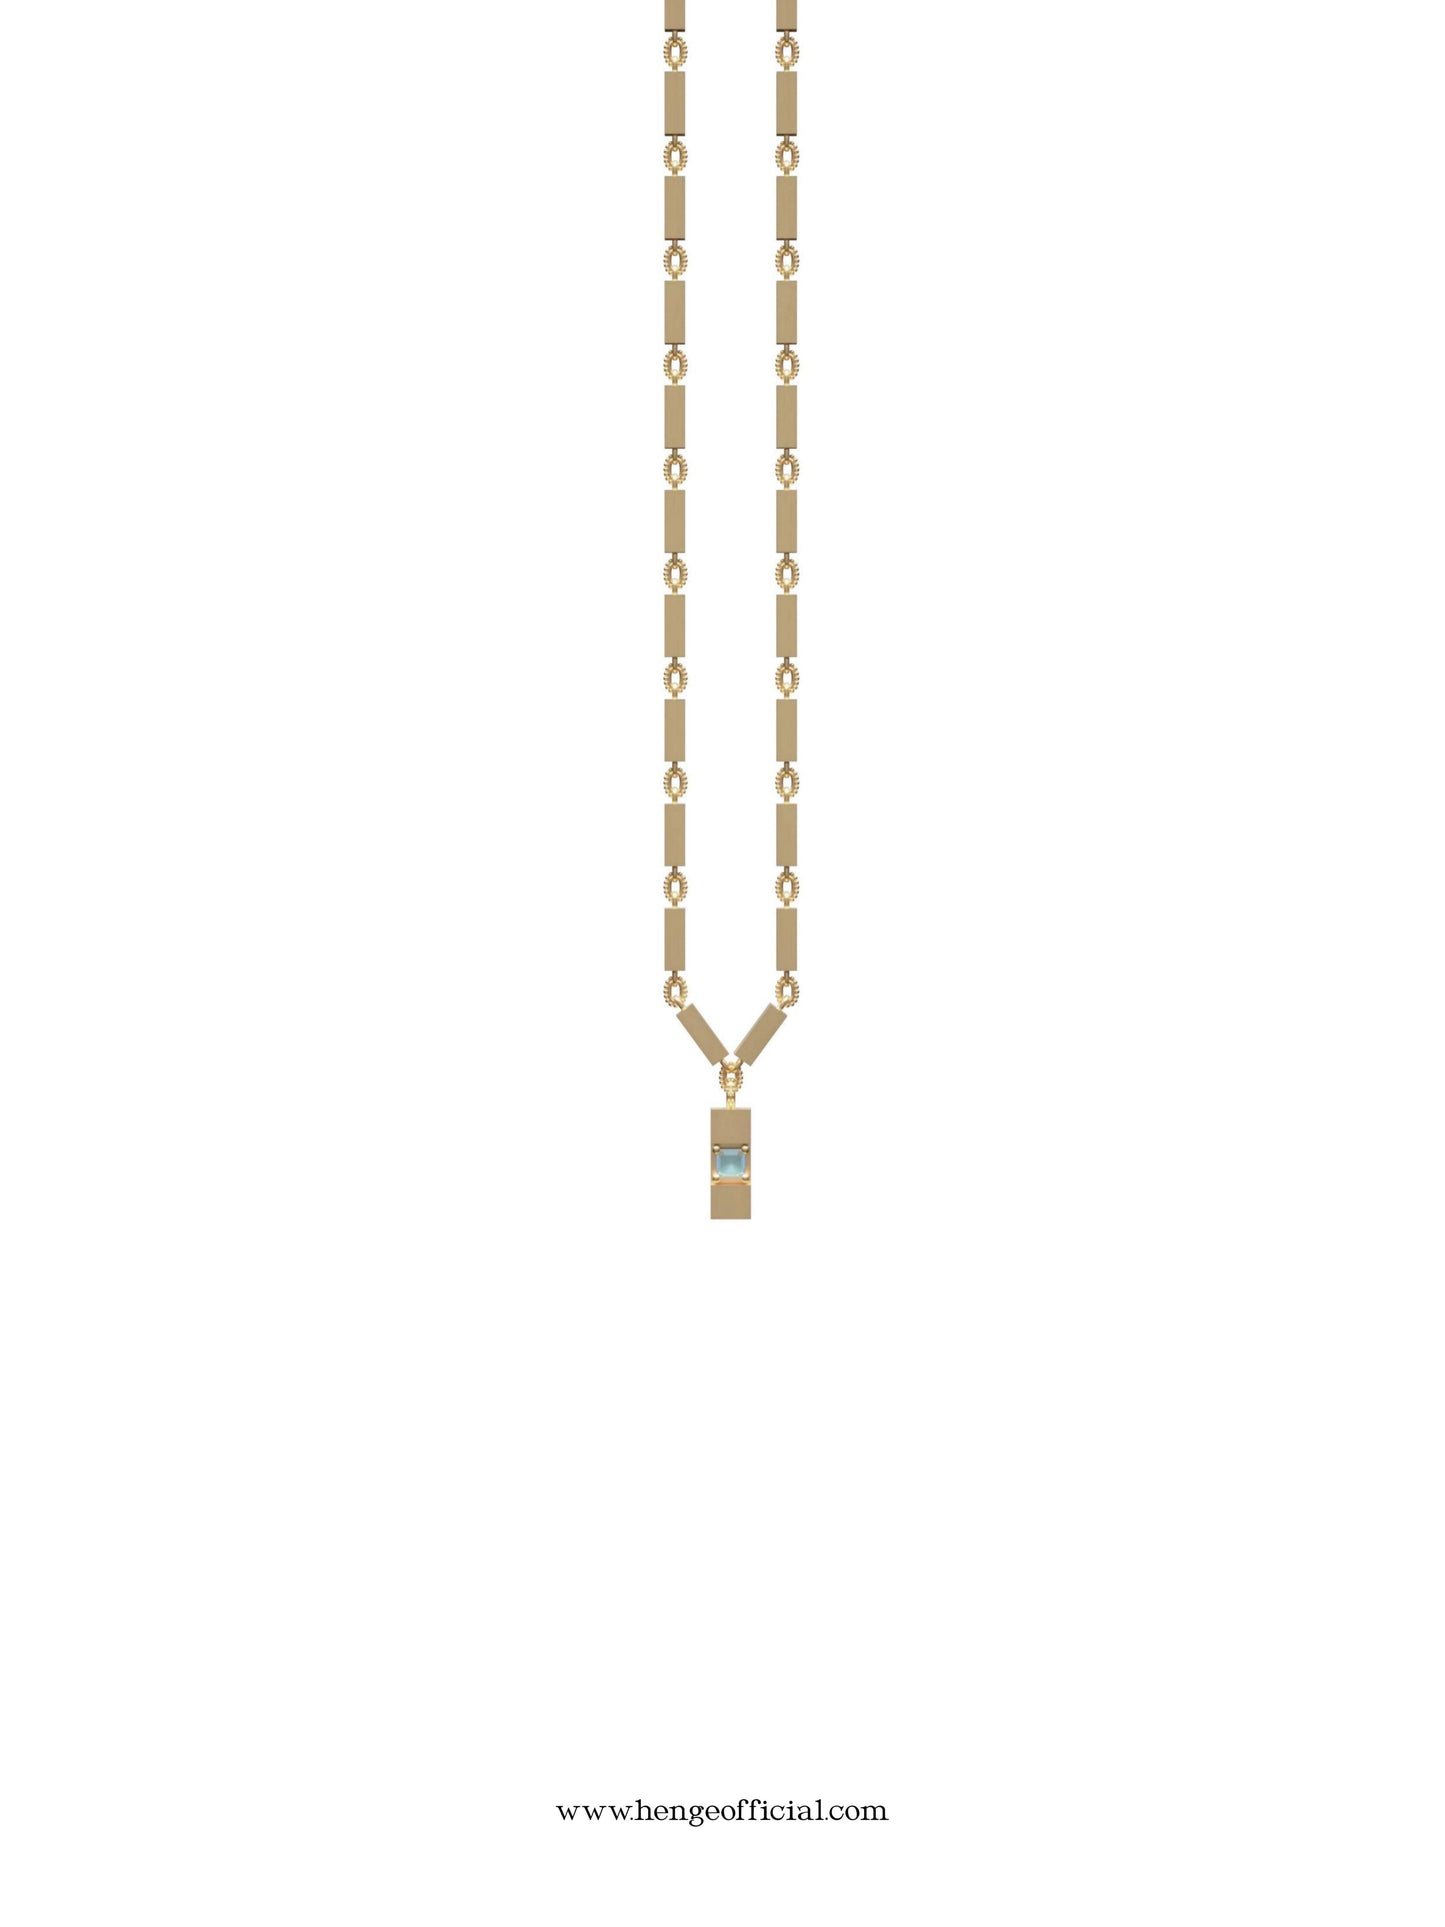 Gold Leather and Stonehenge Pendant Necklace